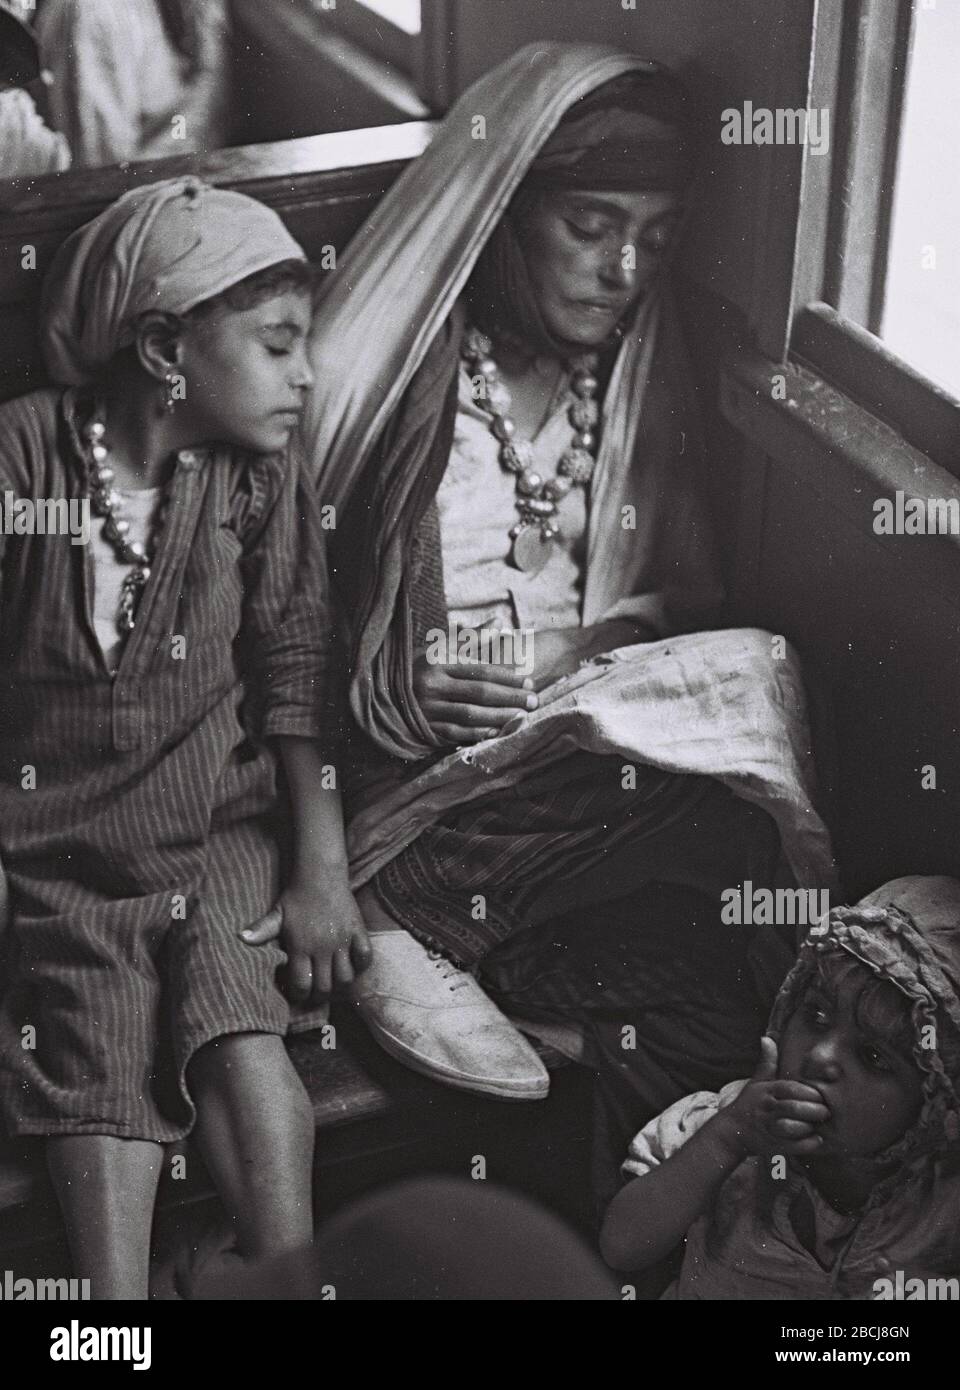 English Immigrants From Yemen Travelling By Train To The Atlit Reception Camp I U O U U O U U E I O U E O E U U O I I I U O U E U O 28 March 1943 This Is Available From National Photo